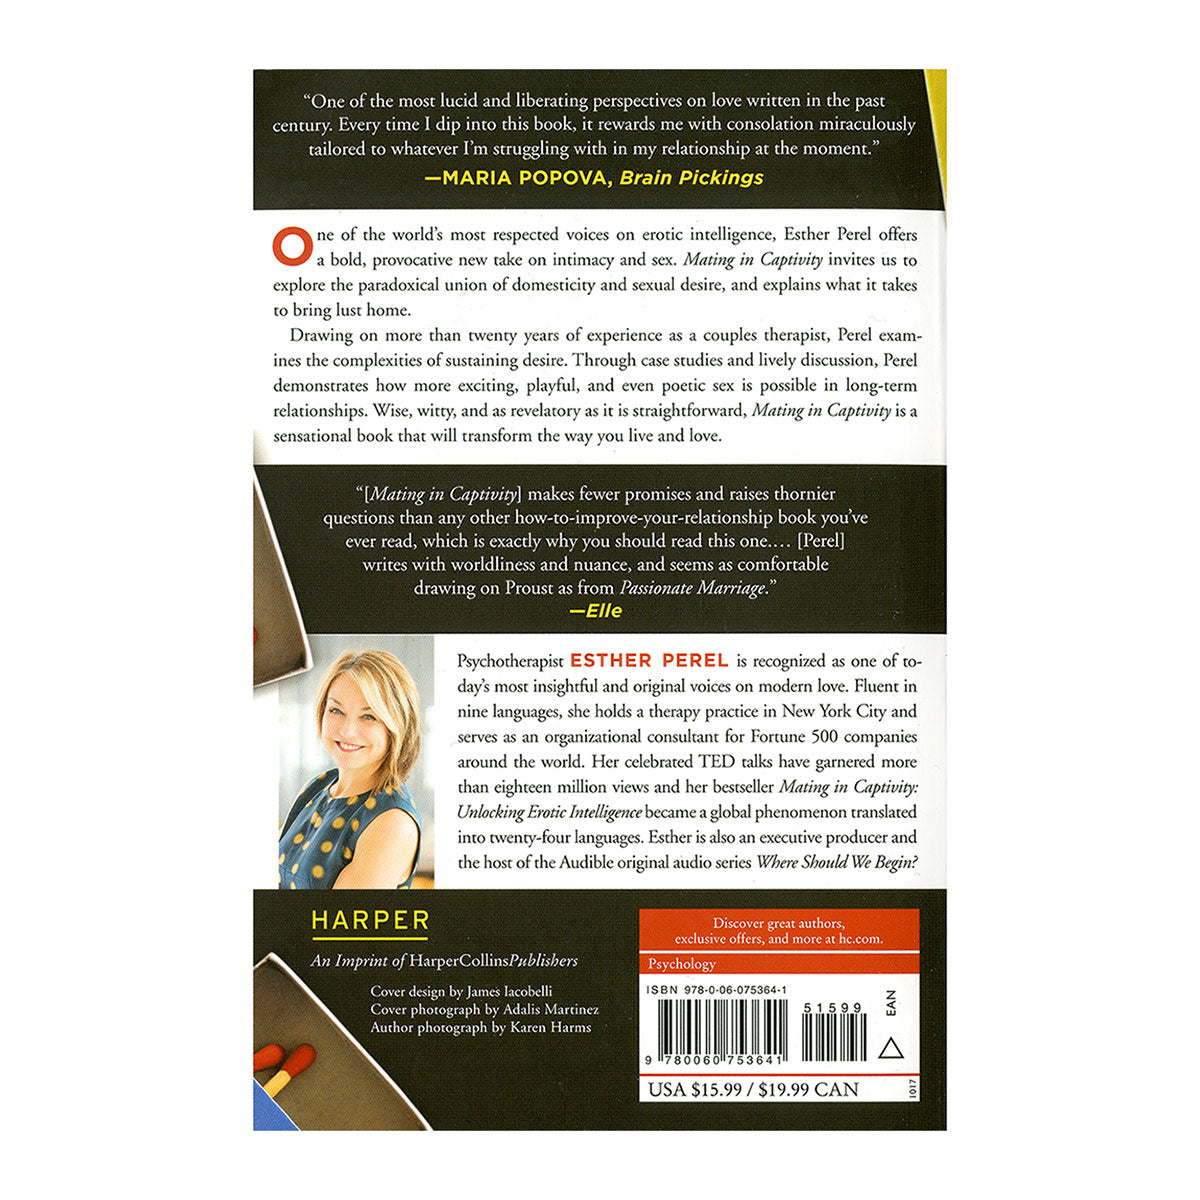 Mating in Captivity by Esther Perel paperback